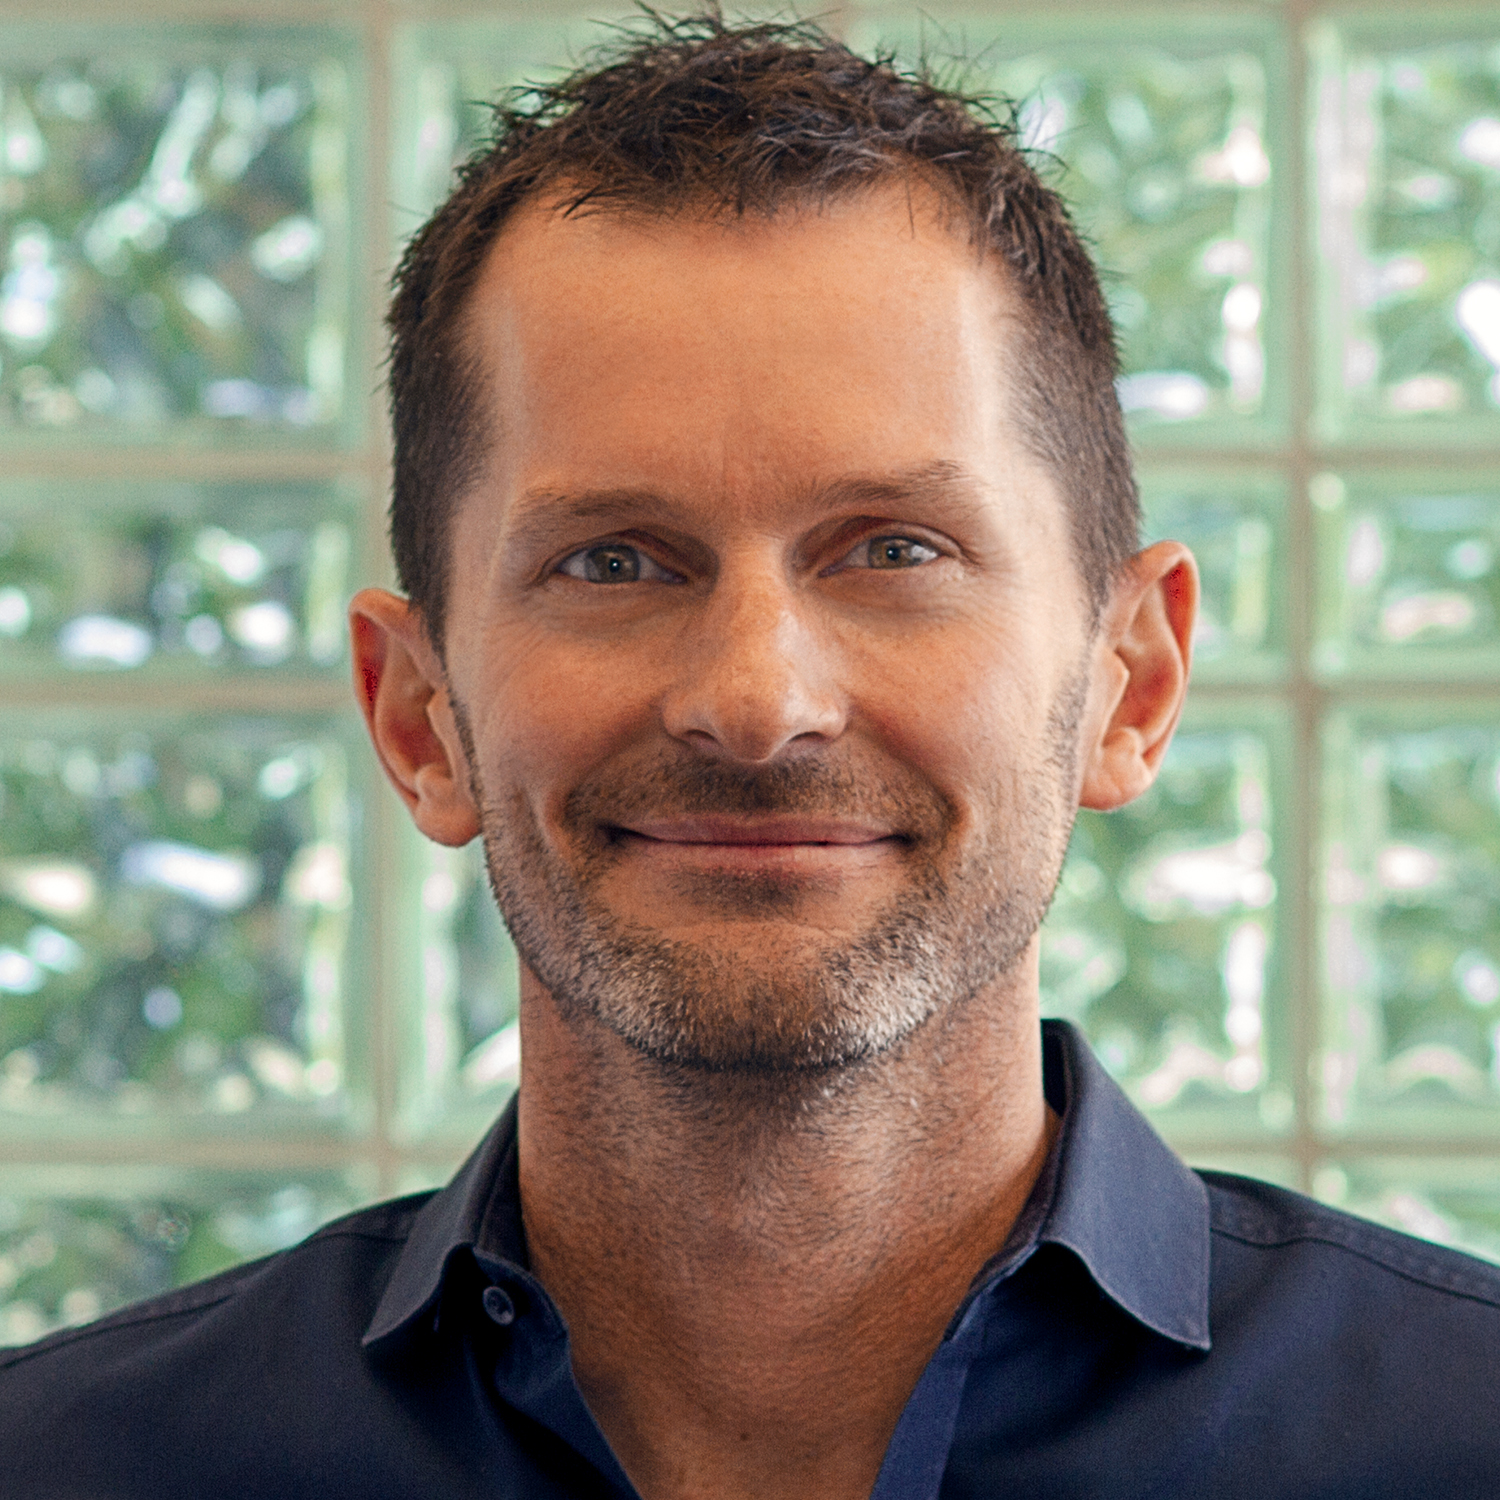 Andy Medley, CEO and Co-founder, PERQ